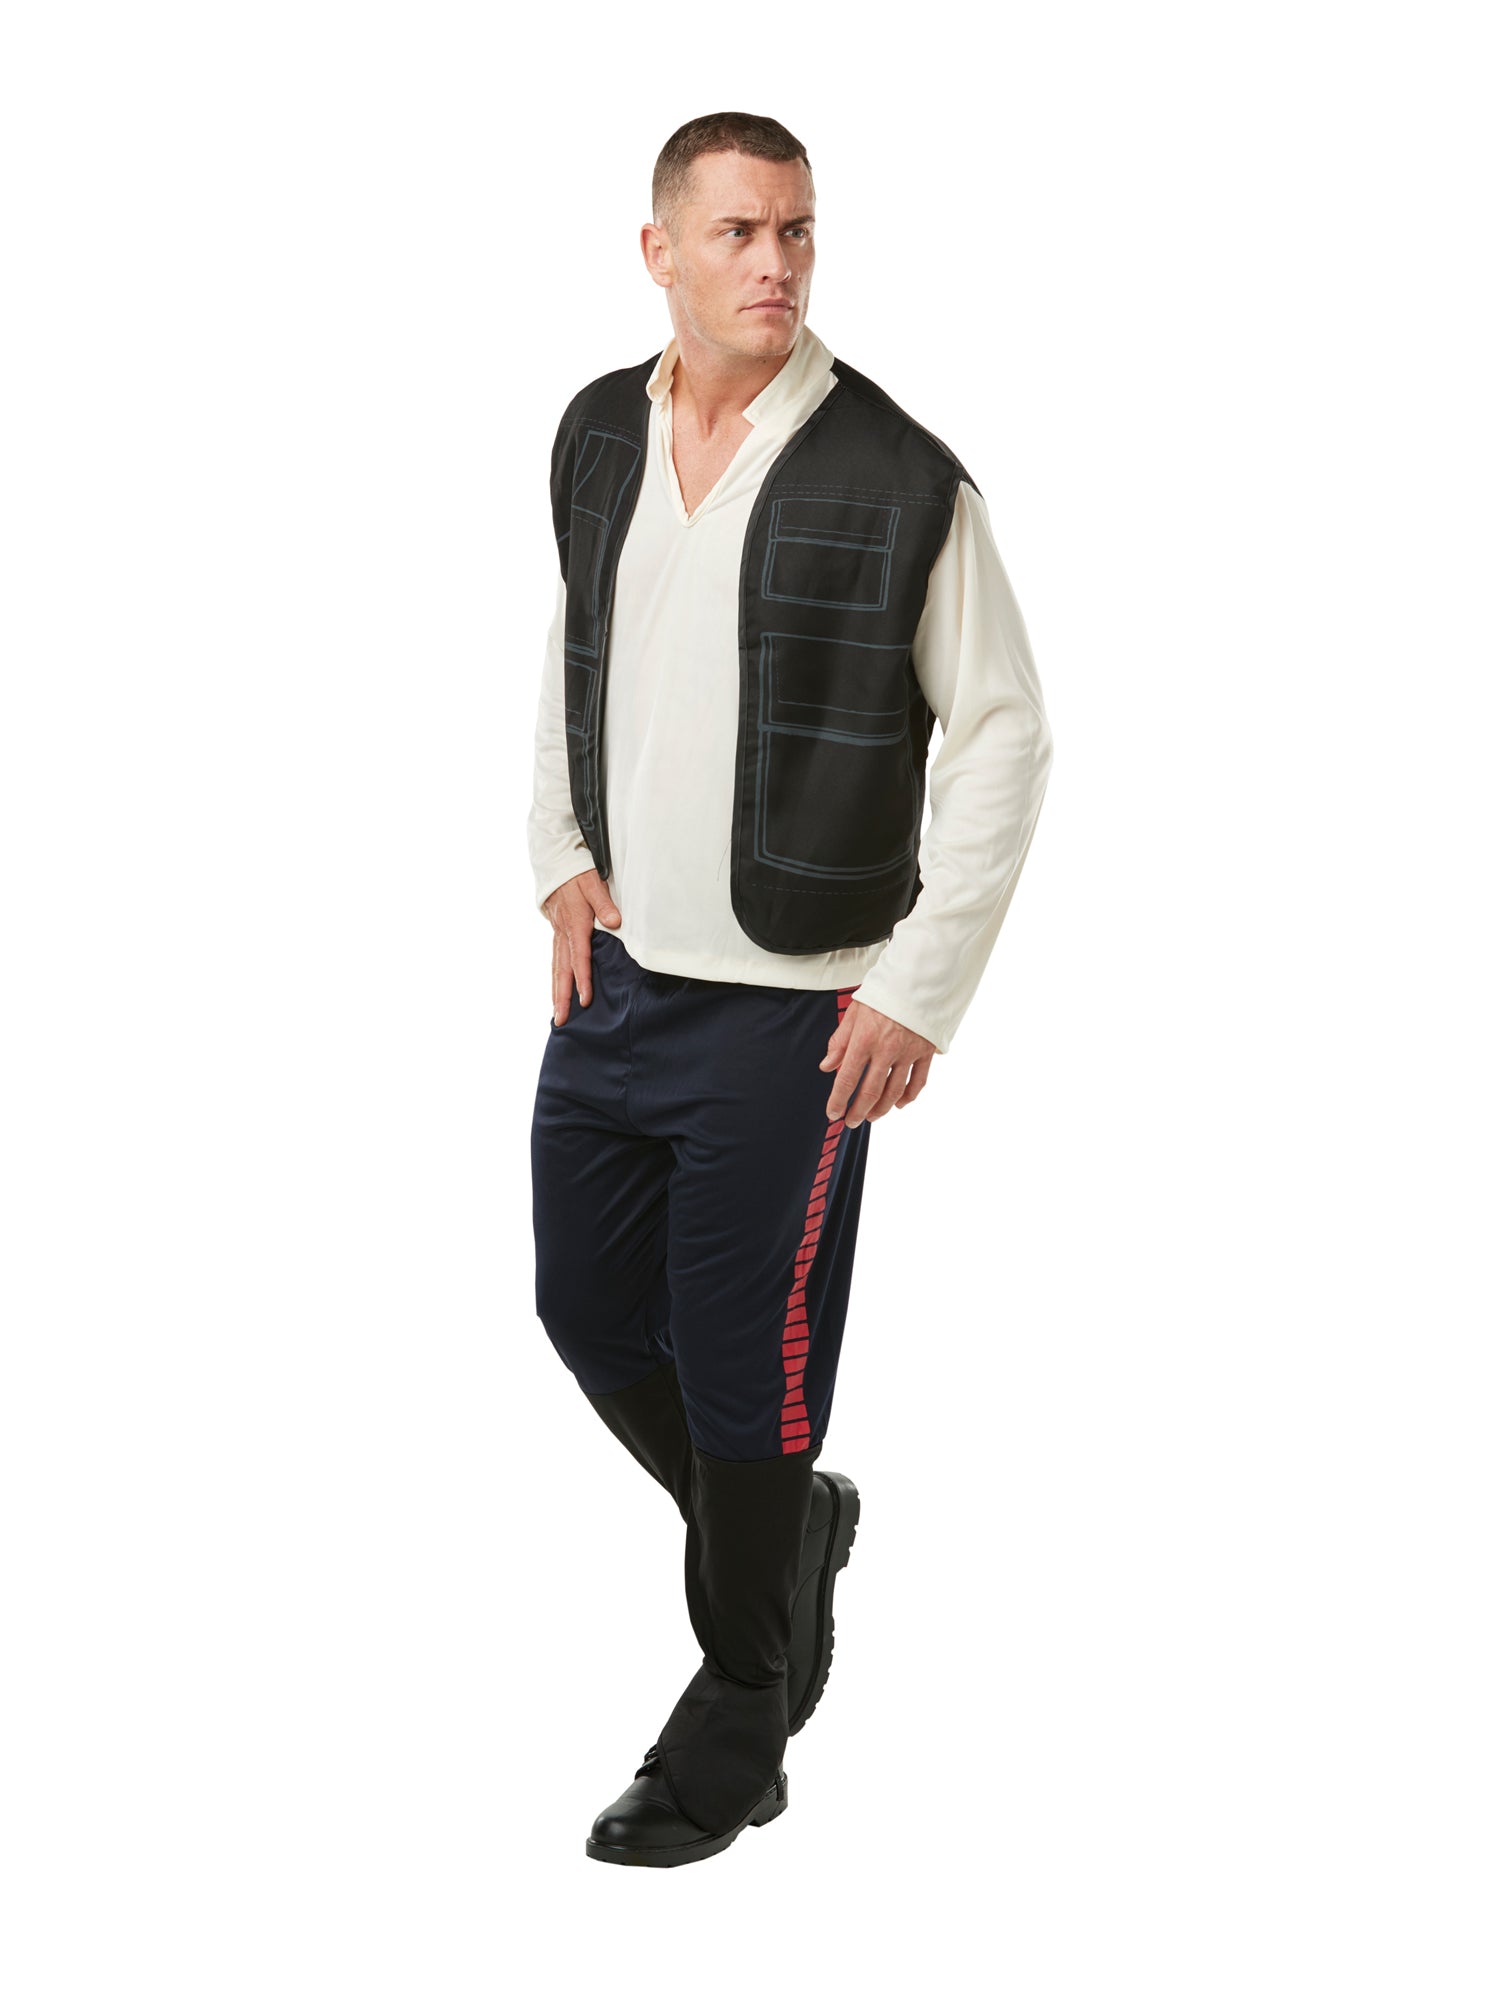 Han Solo, A New Hope, Episode IV, A New Hope, Multi, Star Wars, Adult Costume, Standard, Back